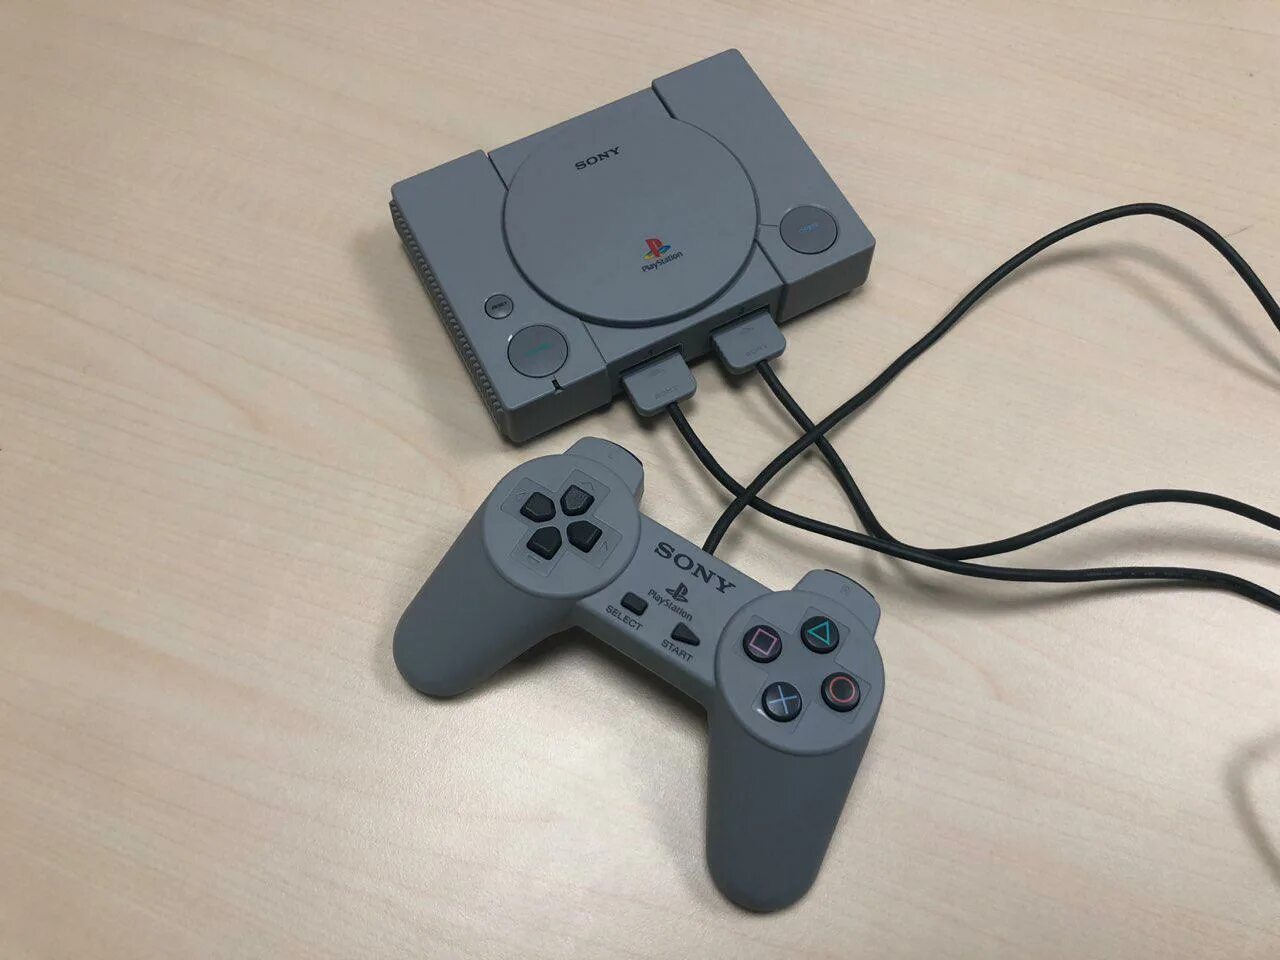 PLAYSTATION Classic ps1. Sony PLAYSTATION 2 Classic. Sony PLAYSTATION Classic Mini. Ps1 Classic Mini.